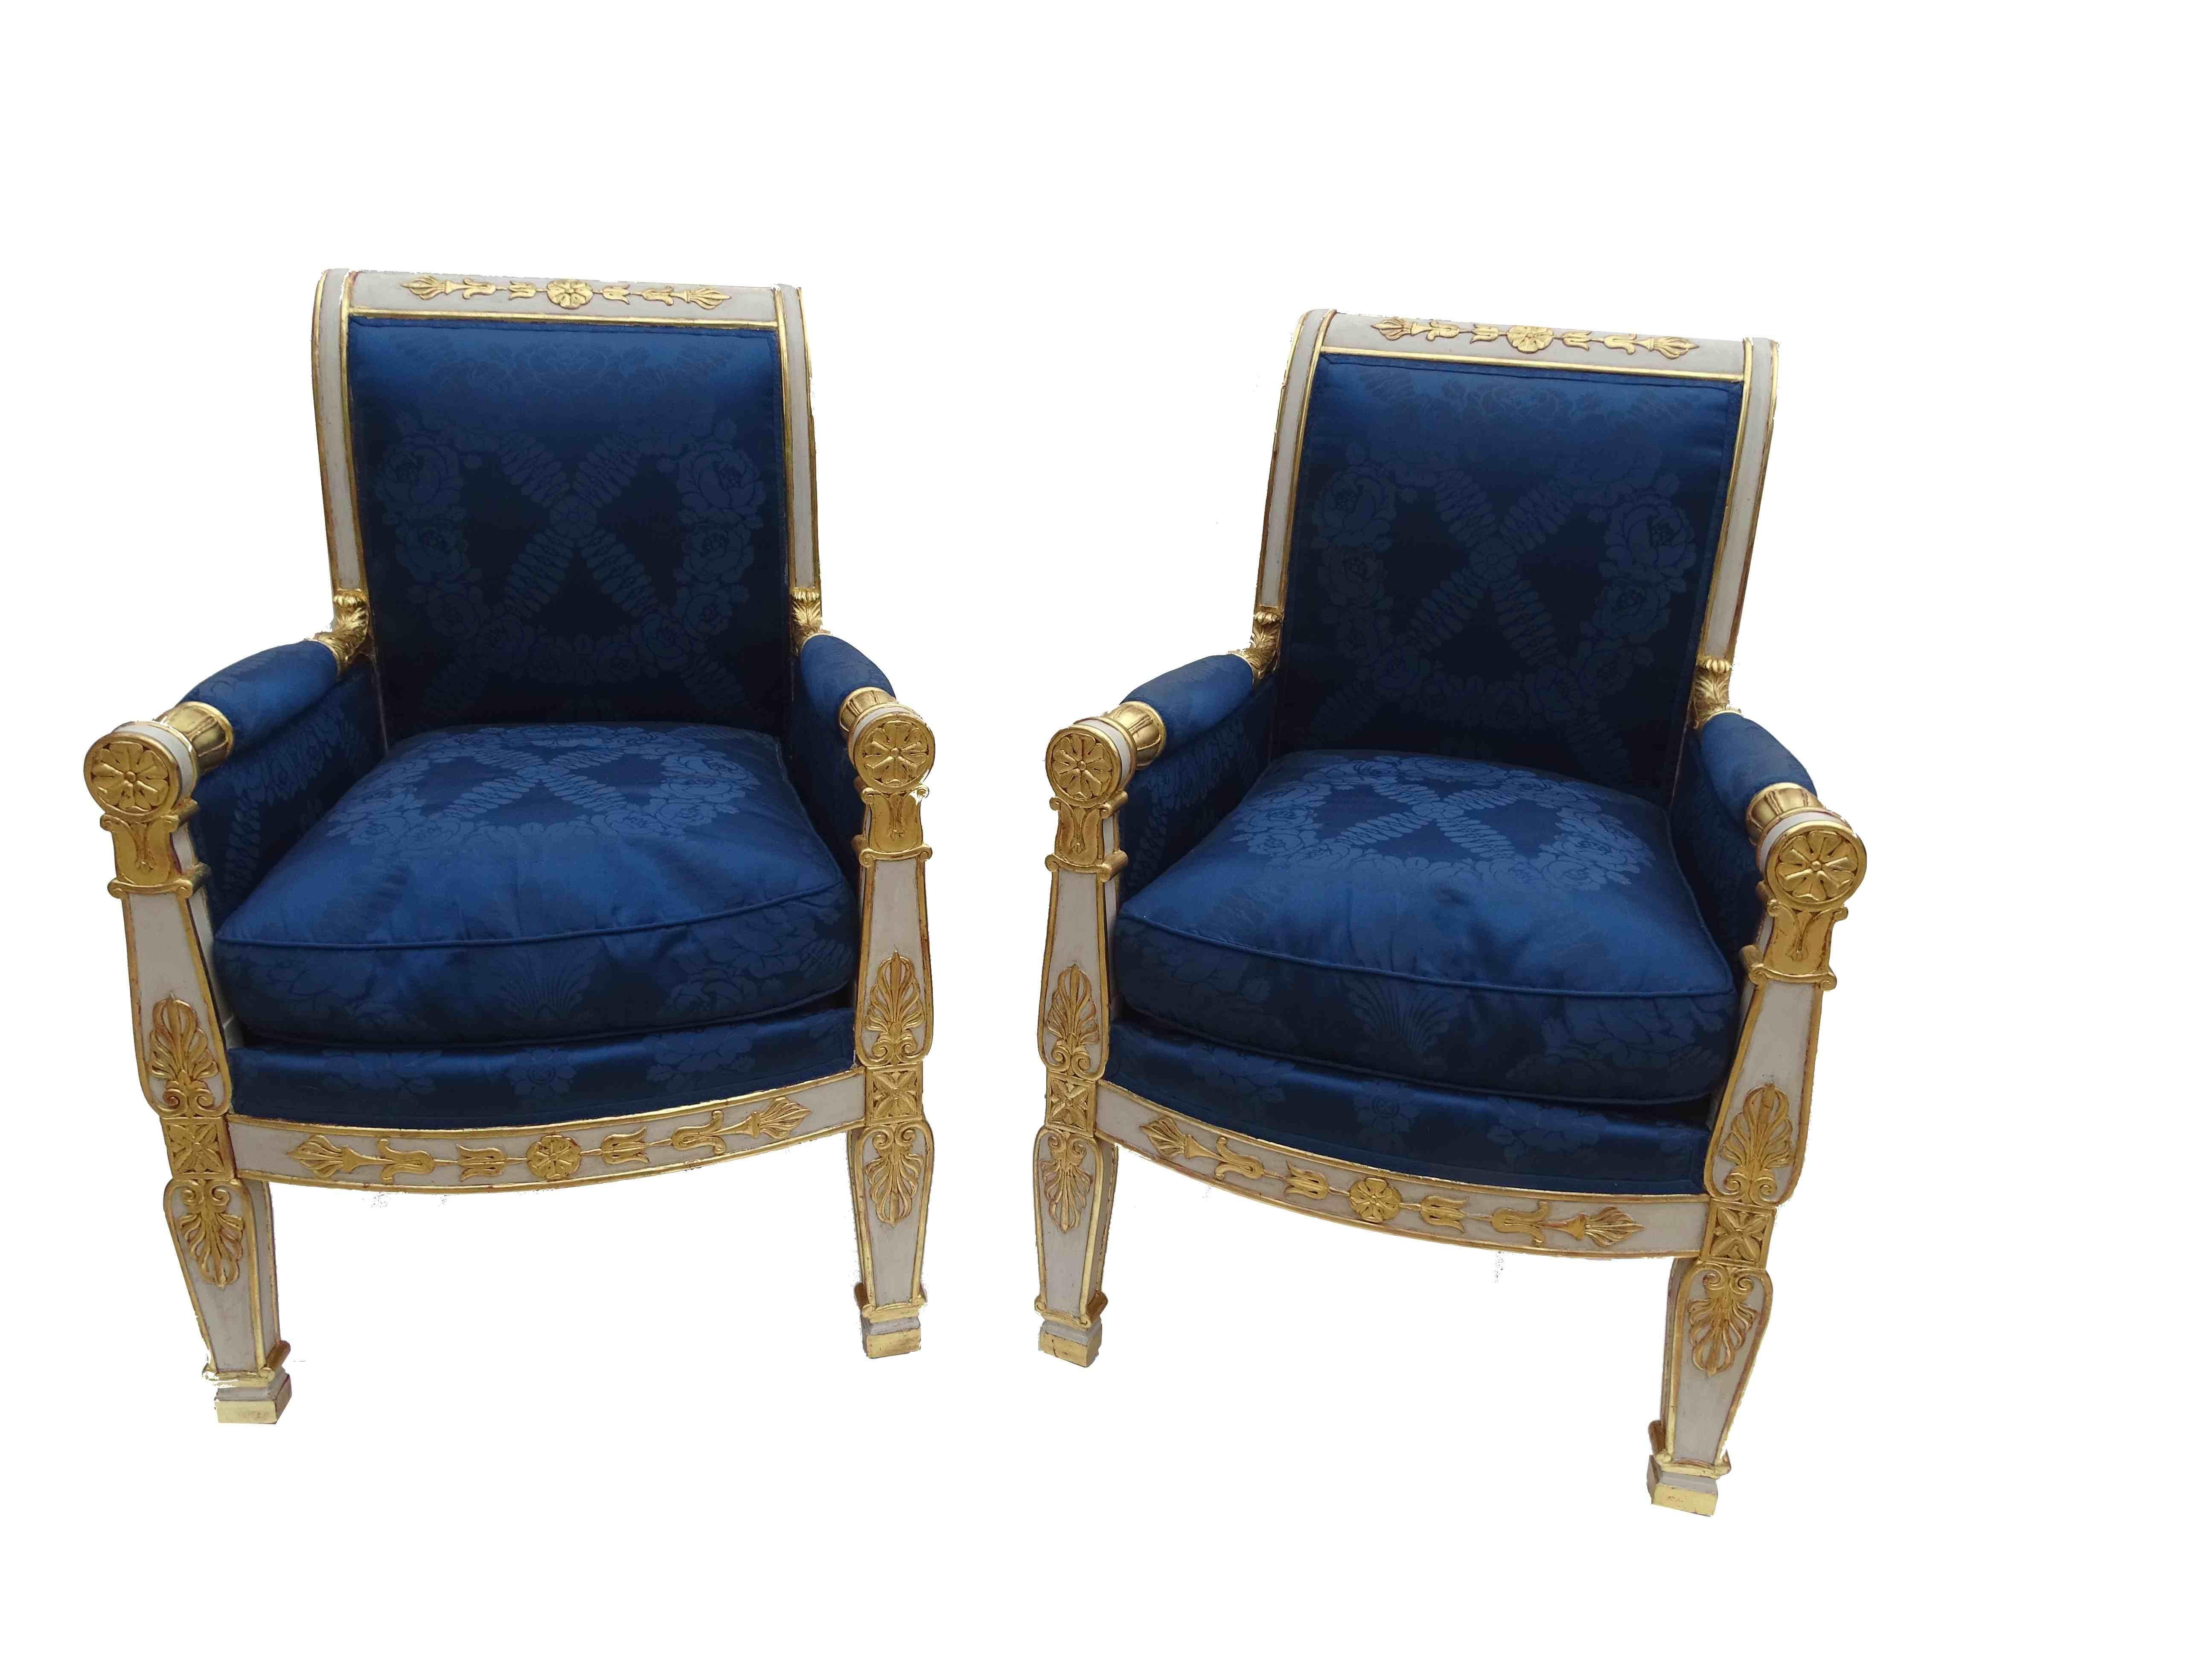 French Gorgeous Empire Pair of  Blue Bergeres Armchairs by Jeanselme, France circa 1825